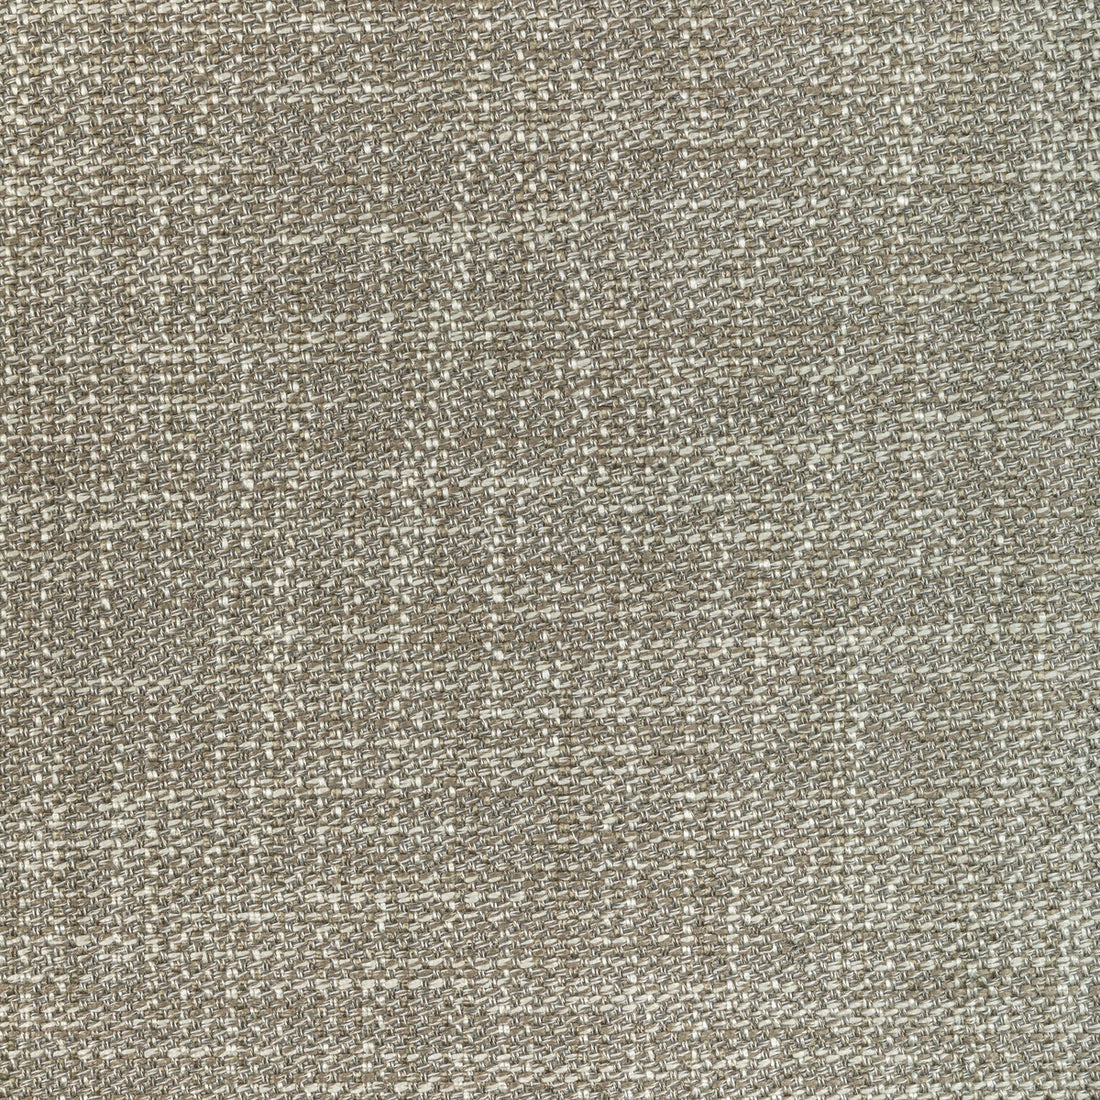 Kravet Couture fabric in 36612-1101 color - pattern 36612.1101.0 - by Kravet Couture in the Mabley Handler collection